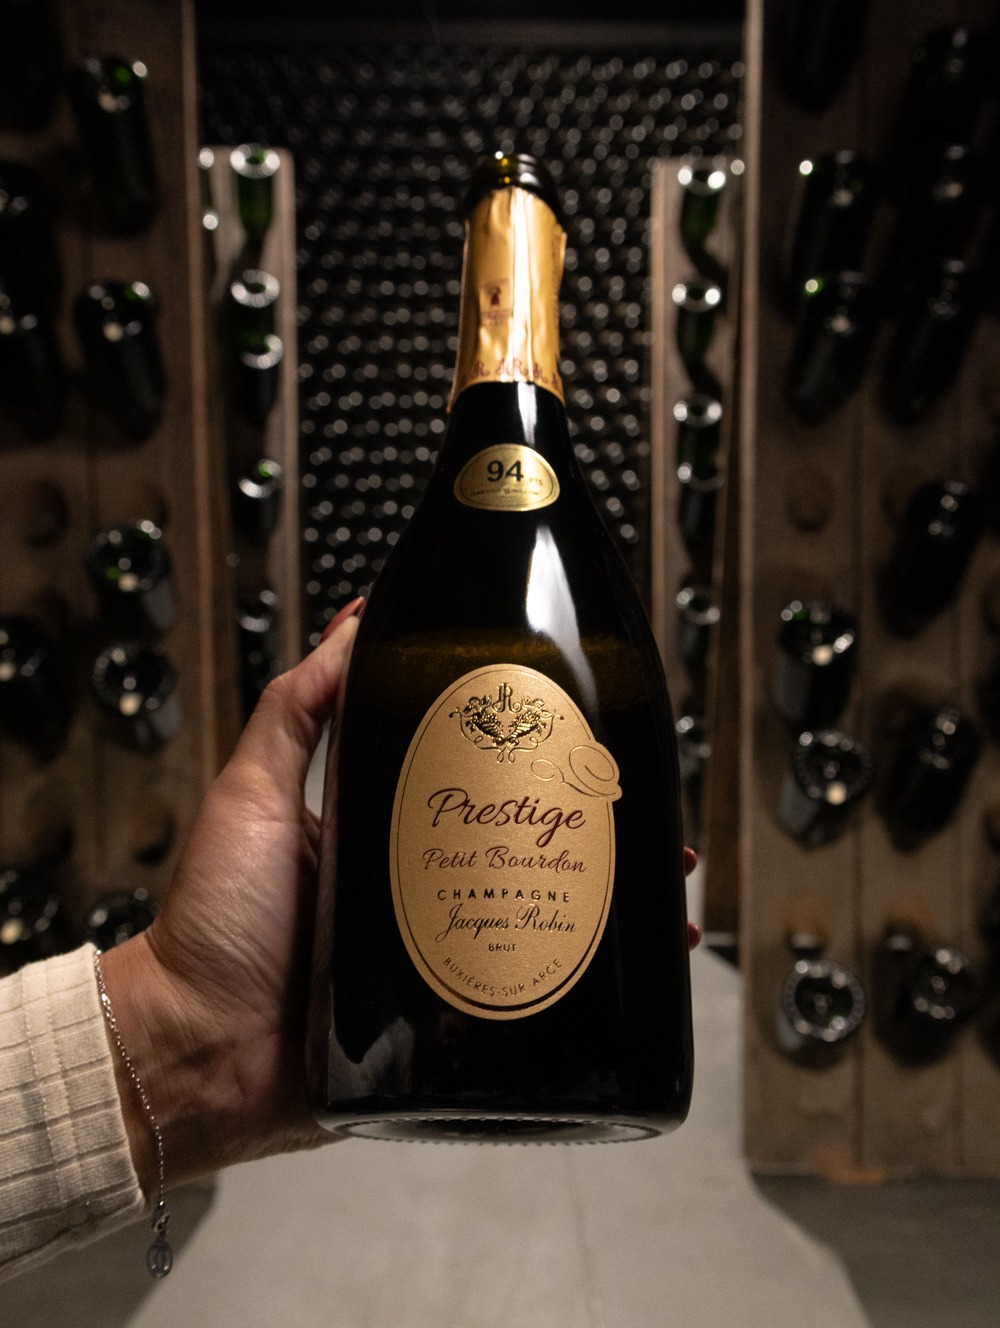 Champagne Jacques Robin Petit Bourdon Prestige Brut NV																	The “Little Bumblebee” is a treat! Floral, elegant, and fresh…and just a delight to sip!